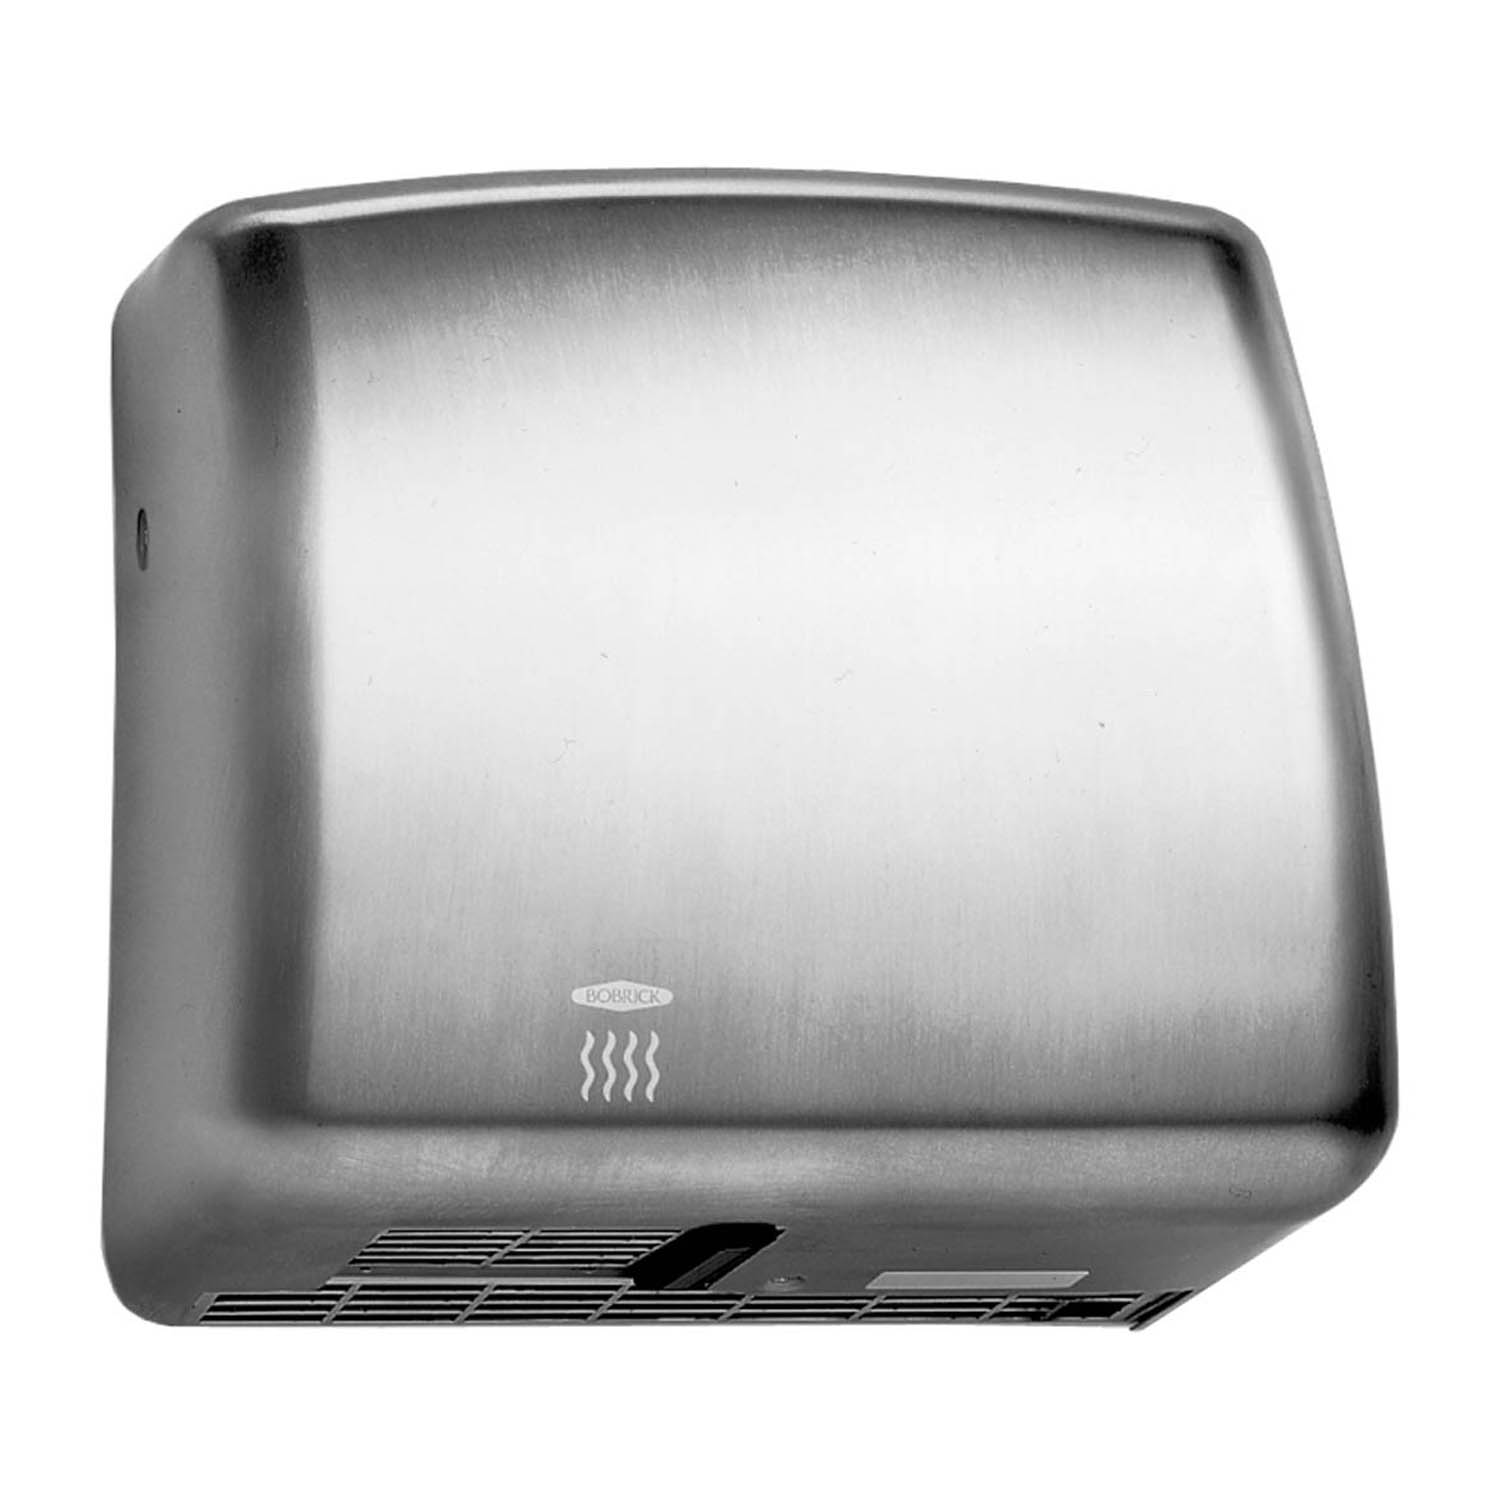 Elan Wall Mounted Hand Dryer with Stainless Steel Cover - Samrick